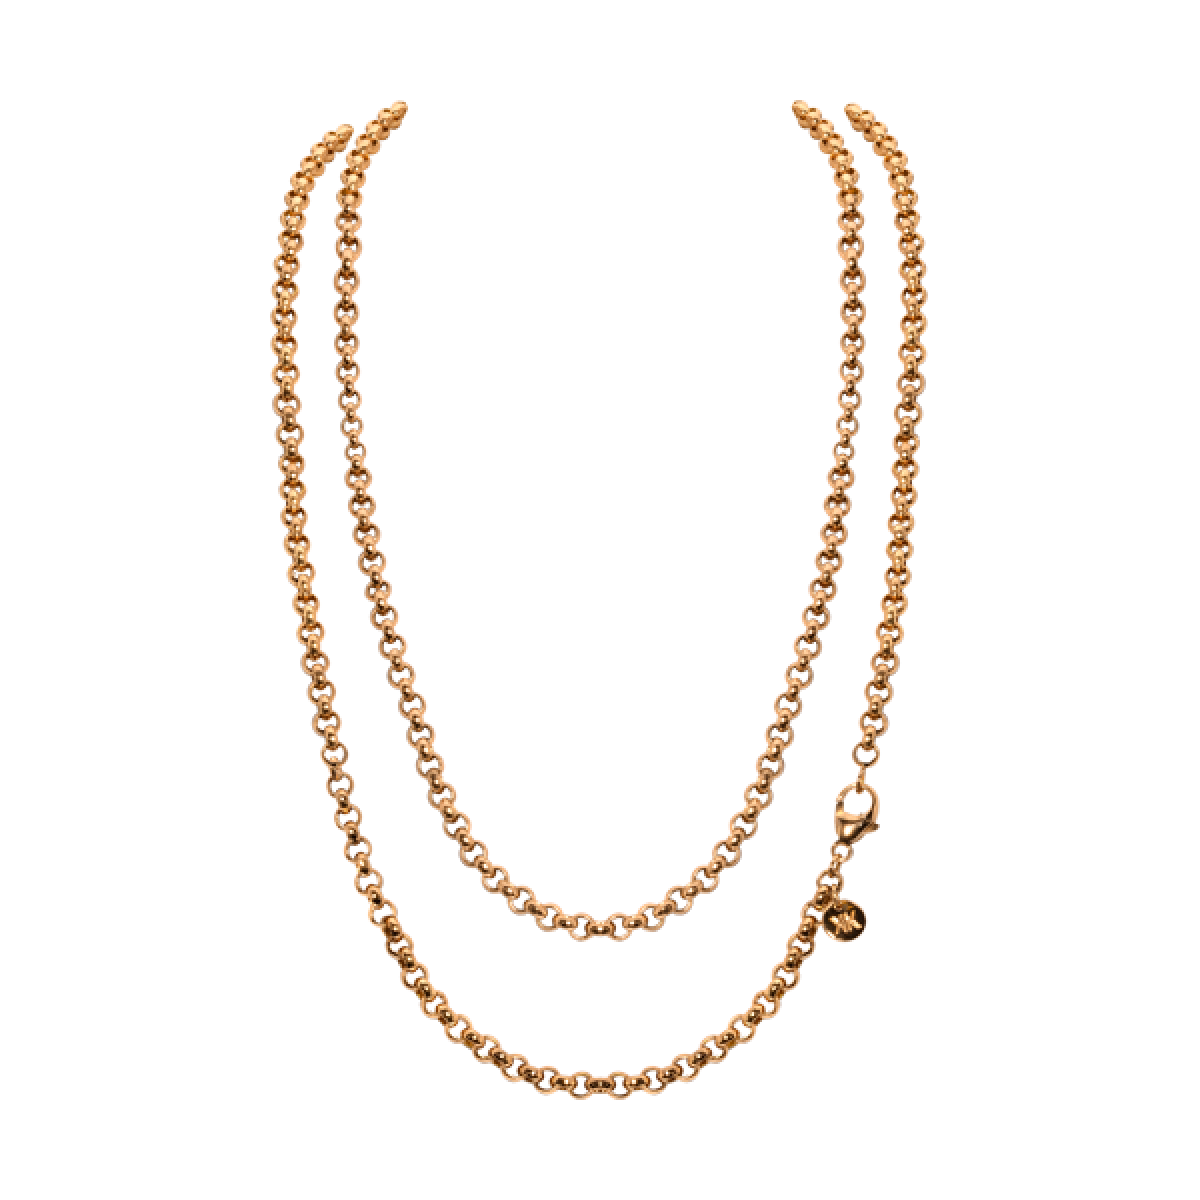 Jewellery Chain PNG Image